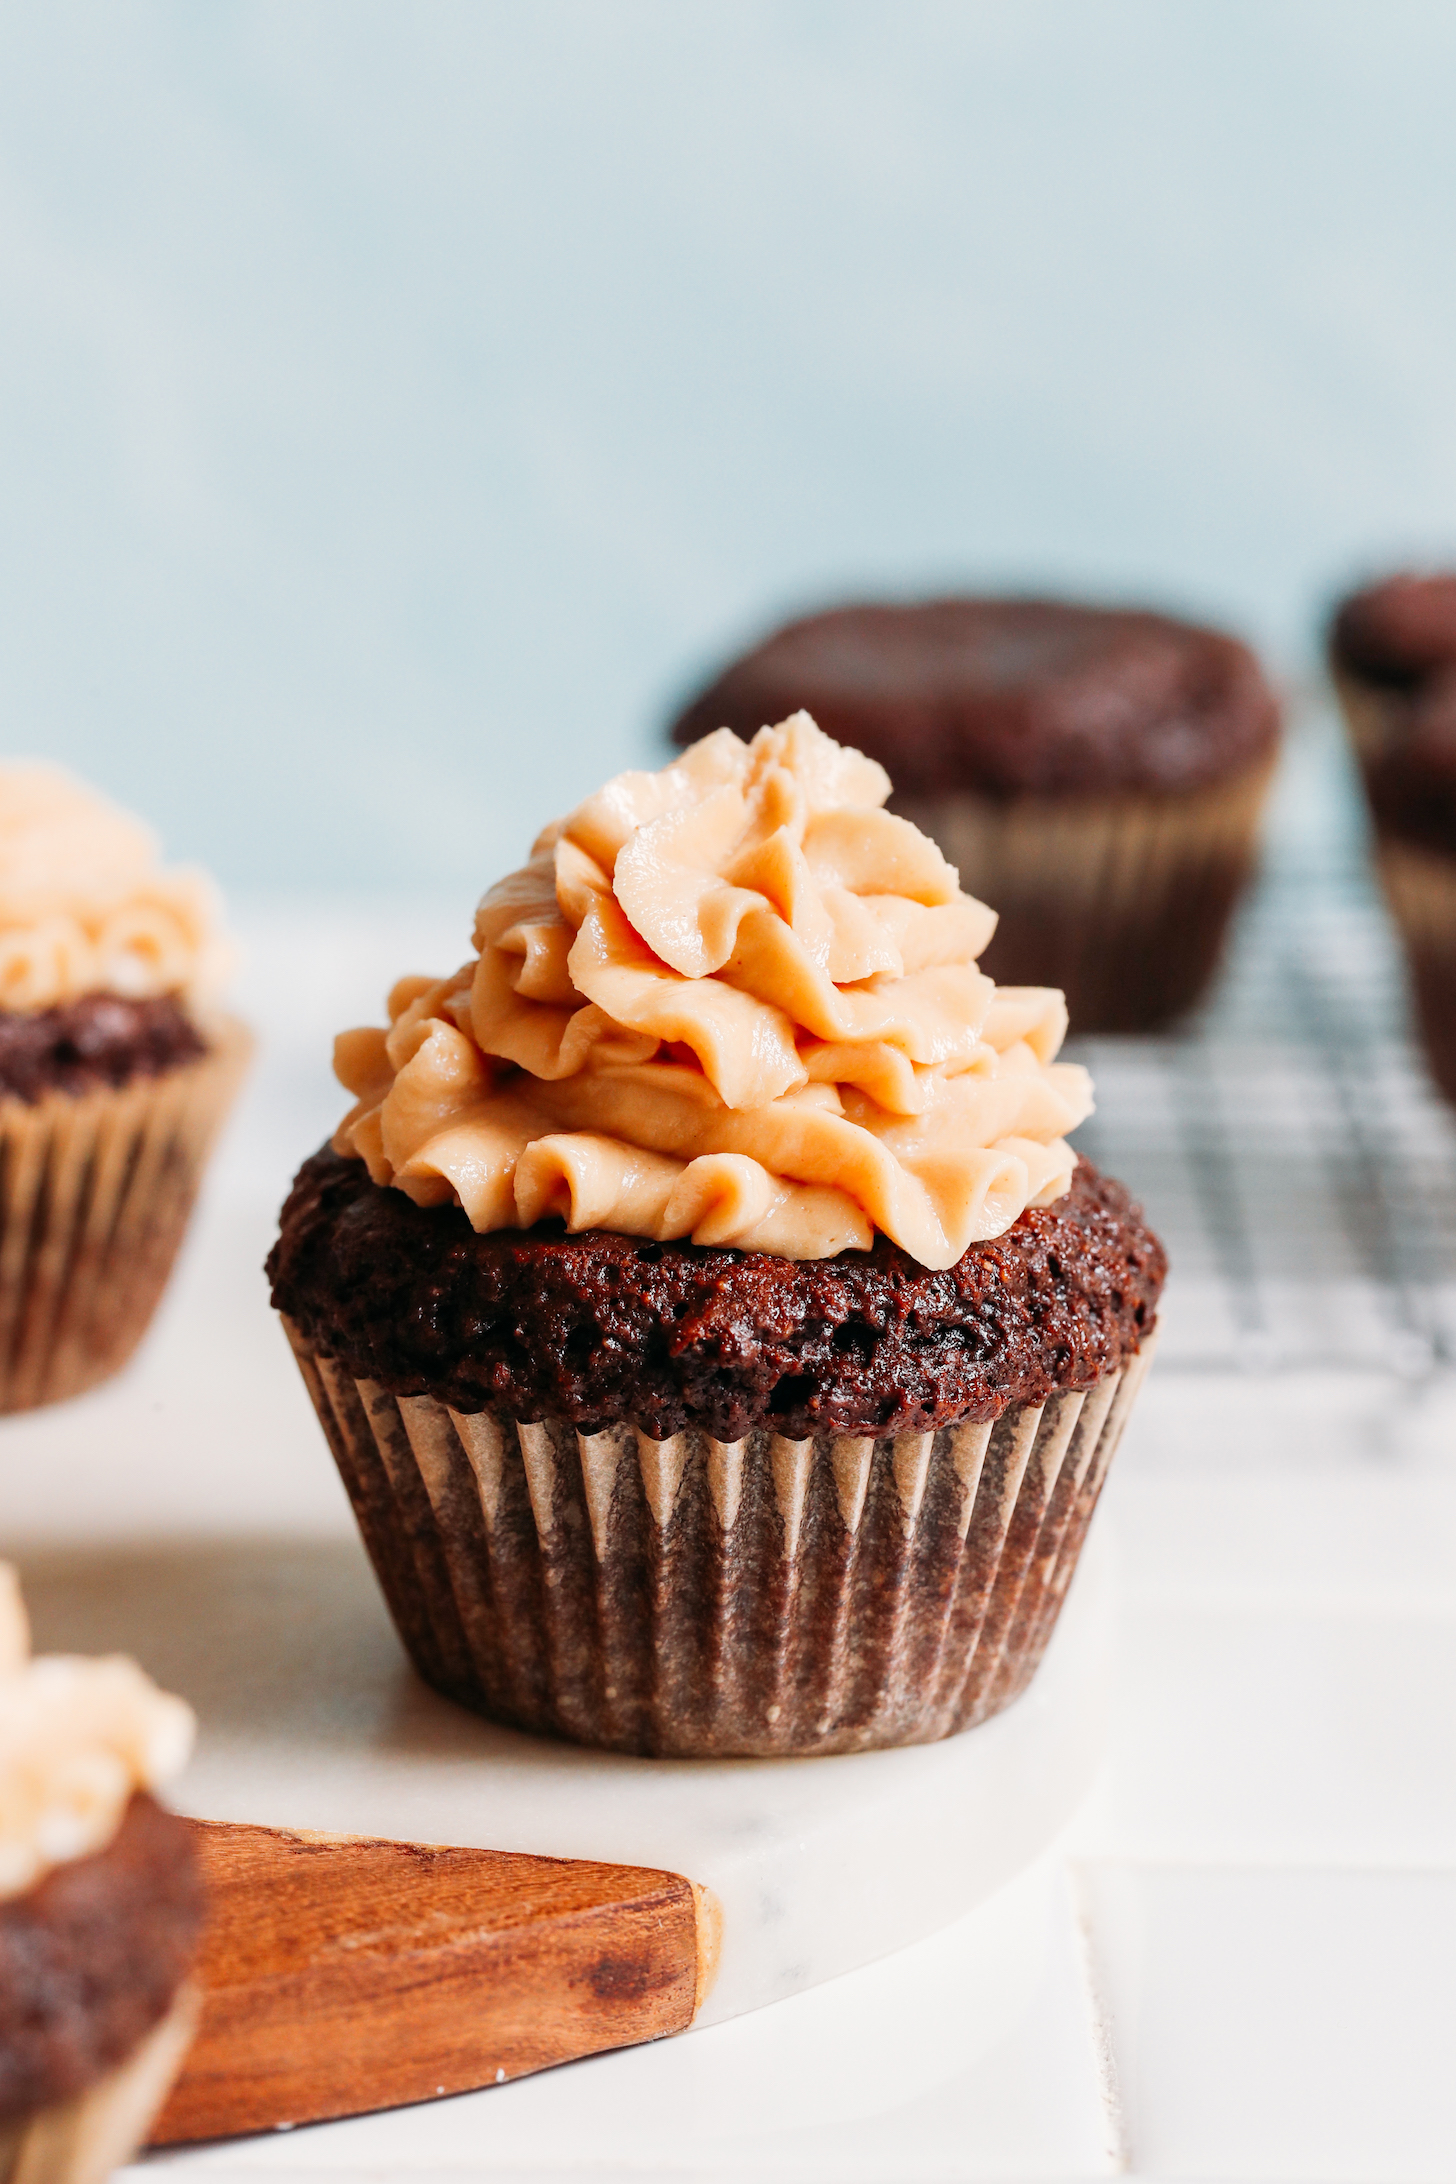 Vegan peanut butter frosting on a chocolate cupcake